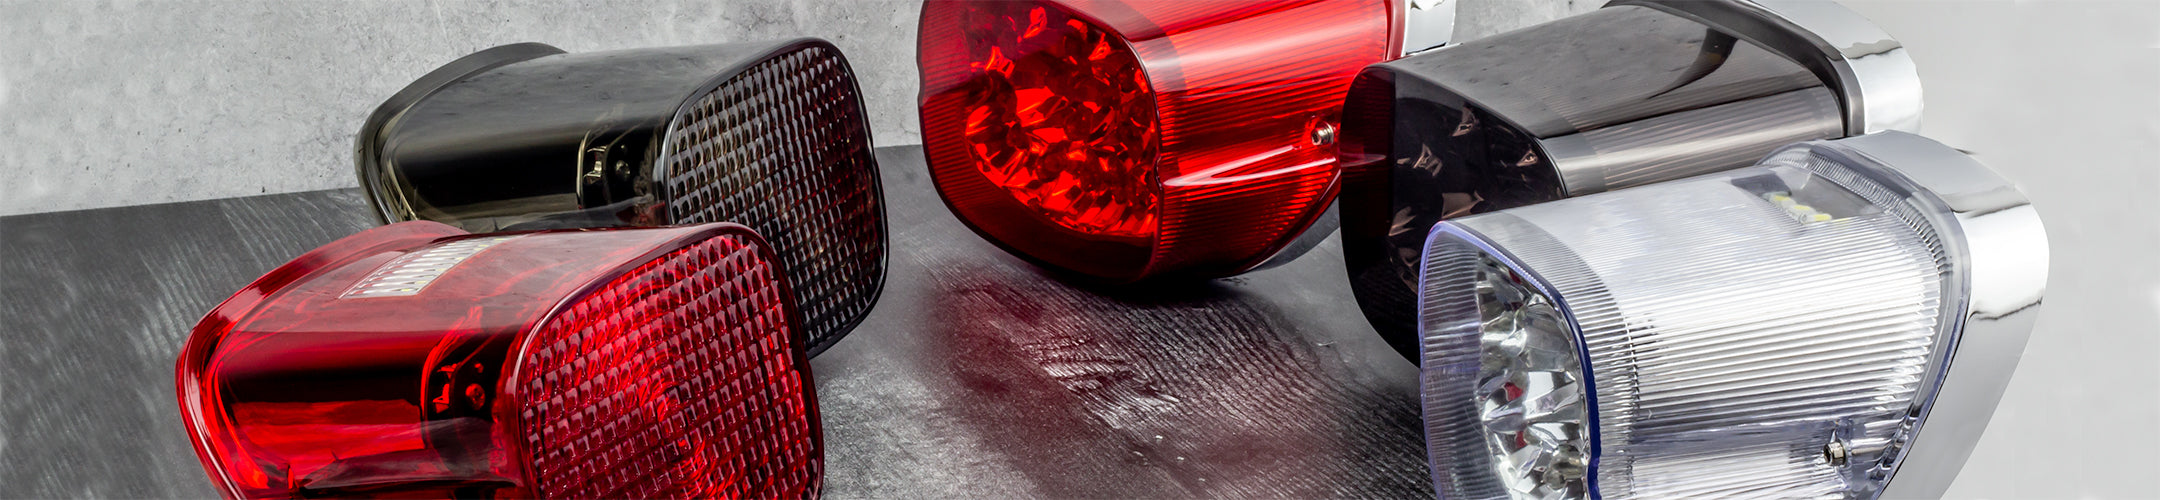 Squareback Motorcycle Taillights